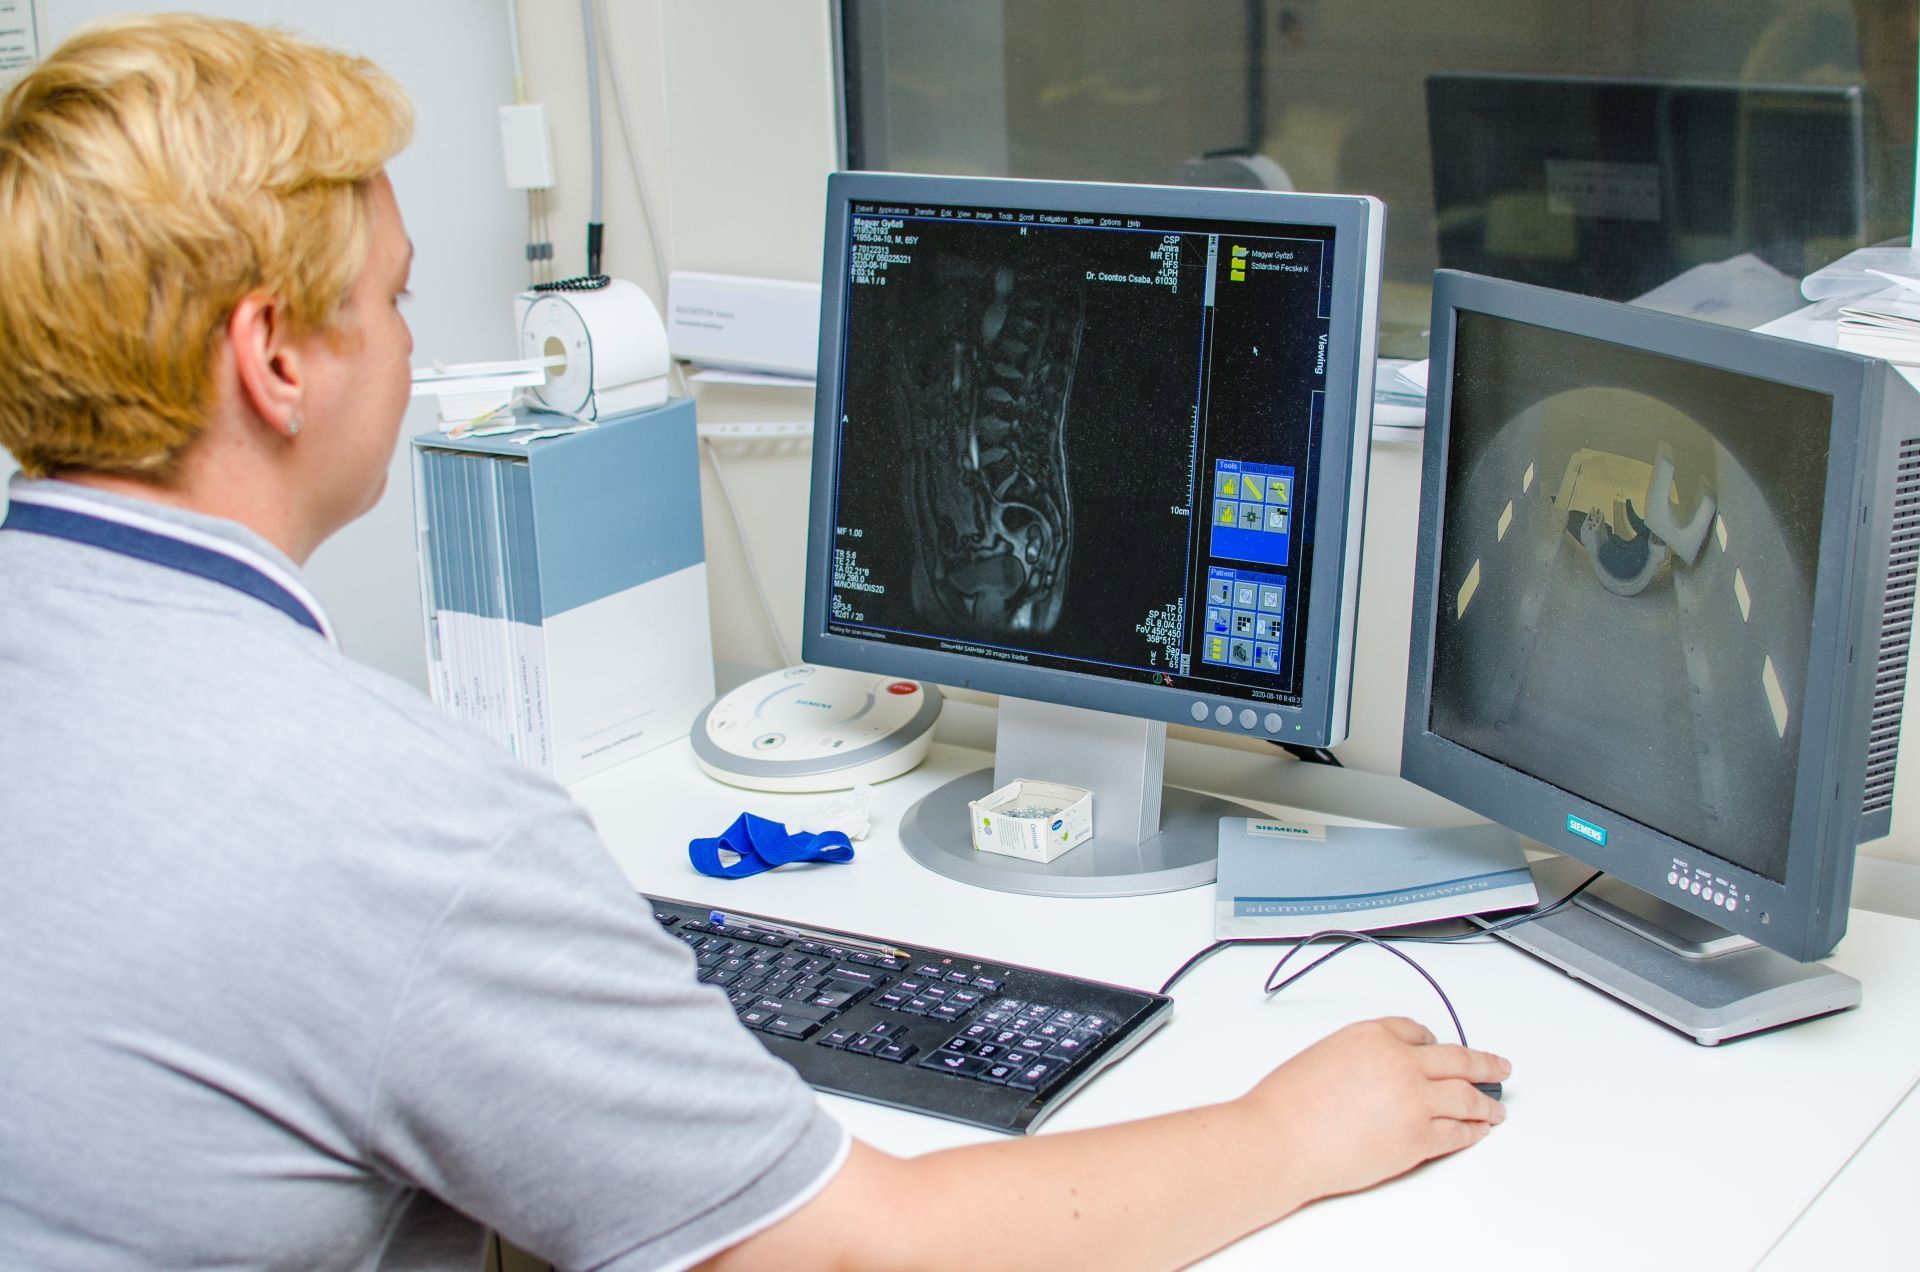 Creating the possibility of E-Radiology Cooperation between hospitals in Miskolc and Kráľovský Chlmec